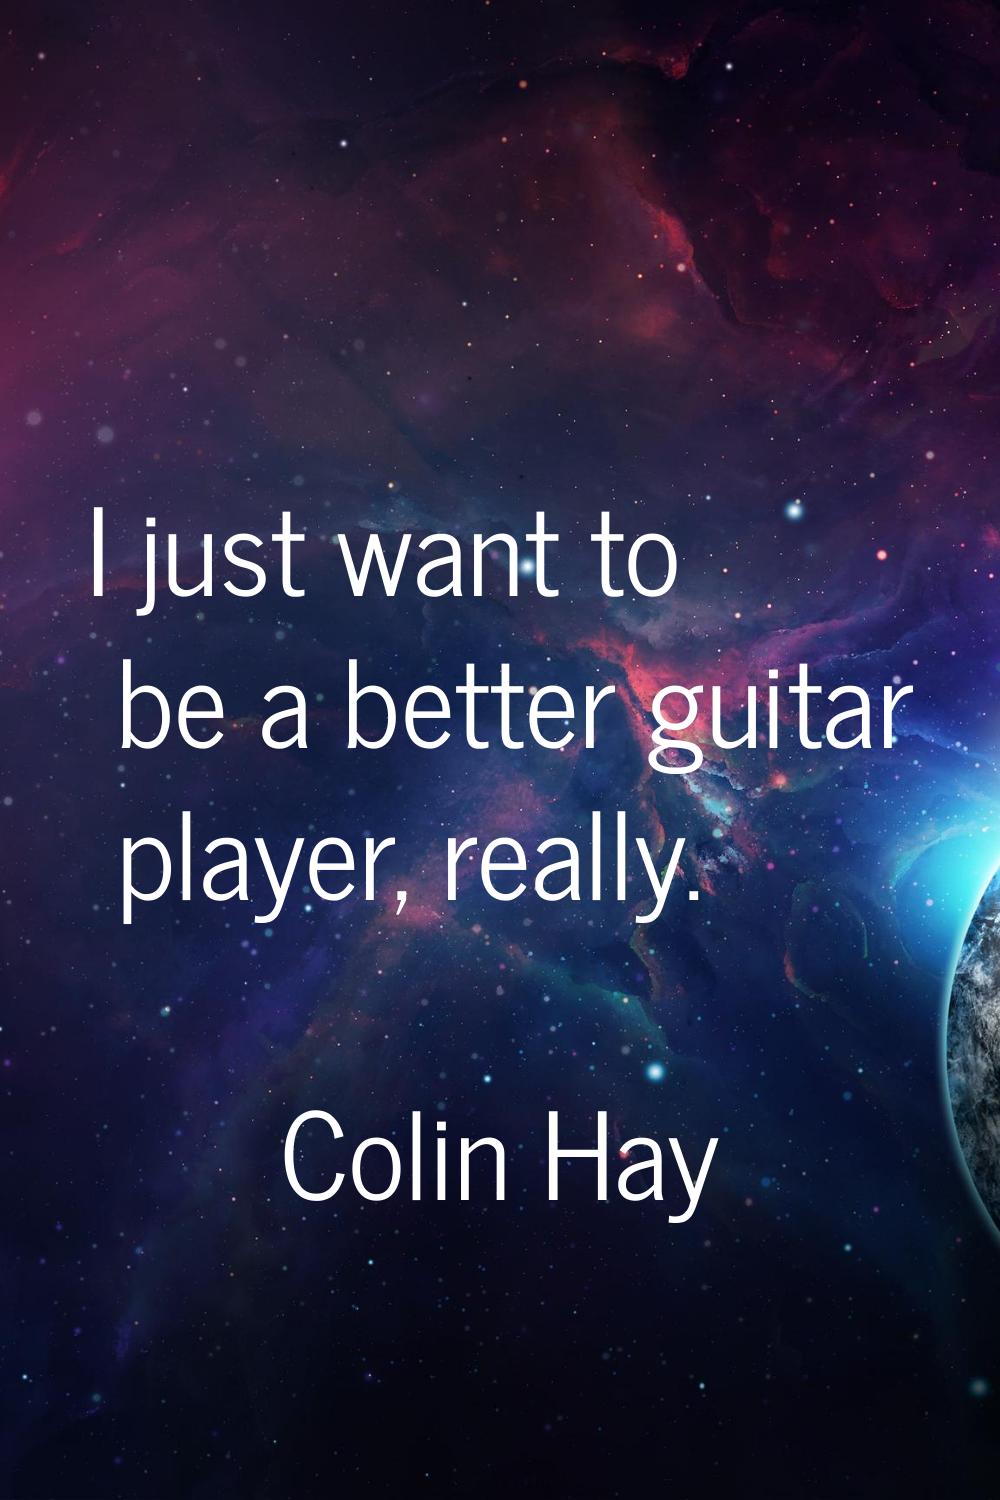 I just want to be a better guitar player, really.